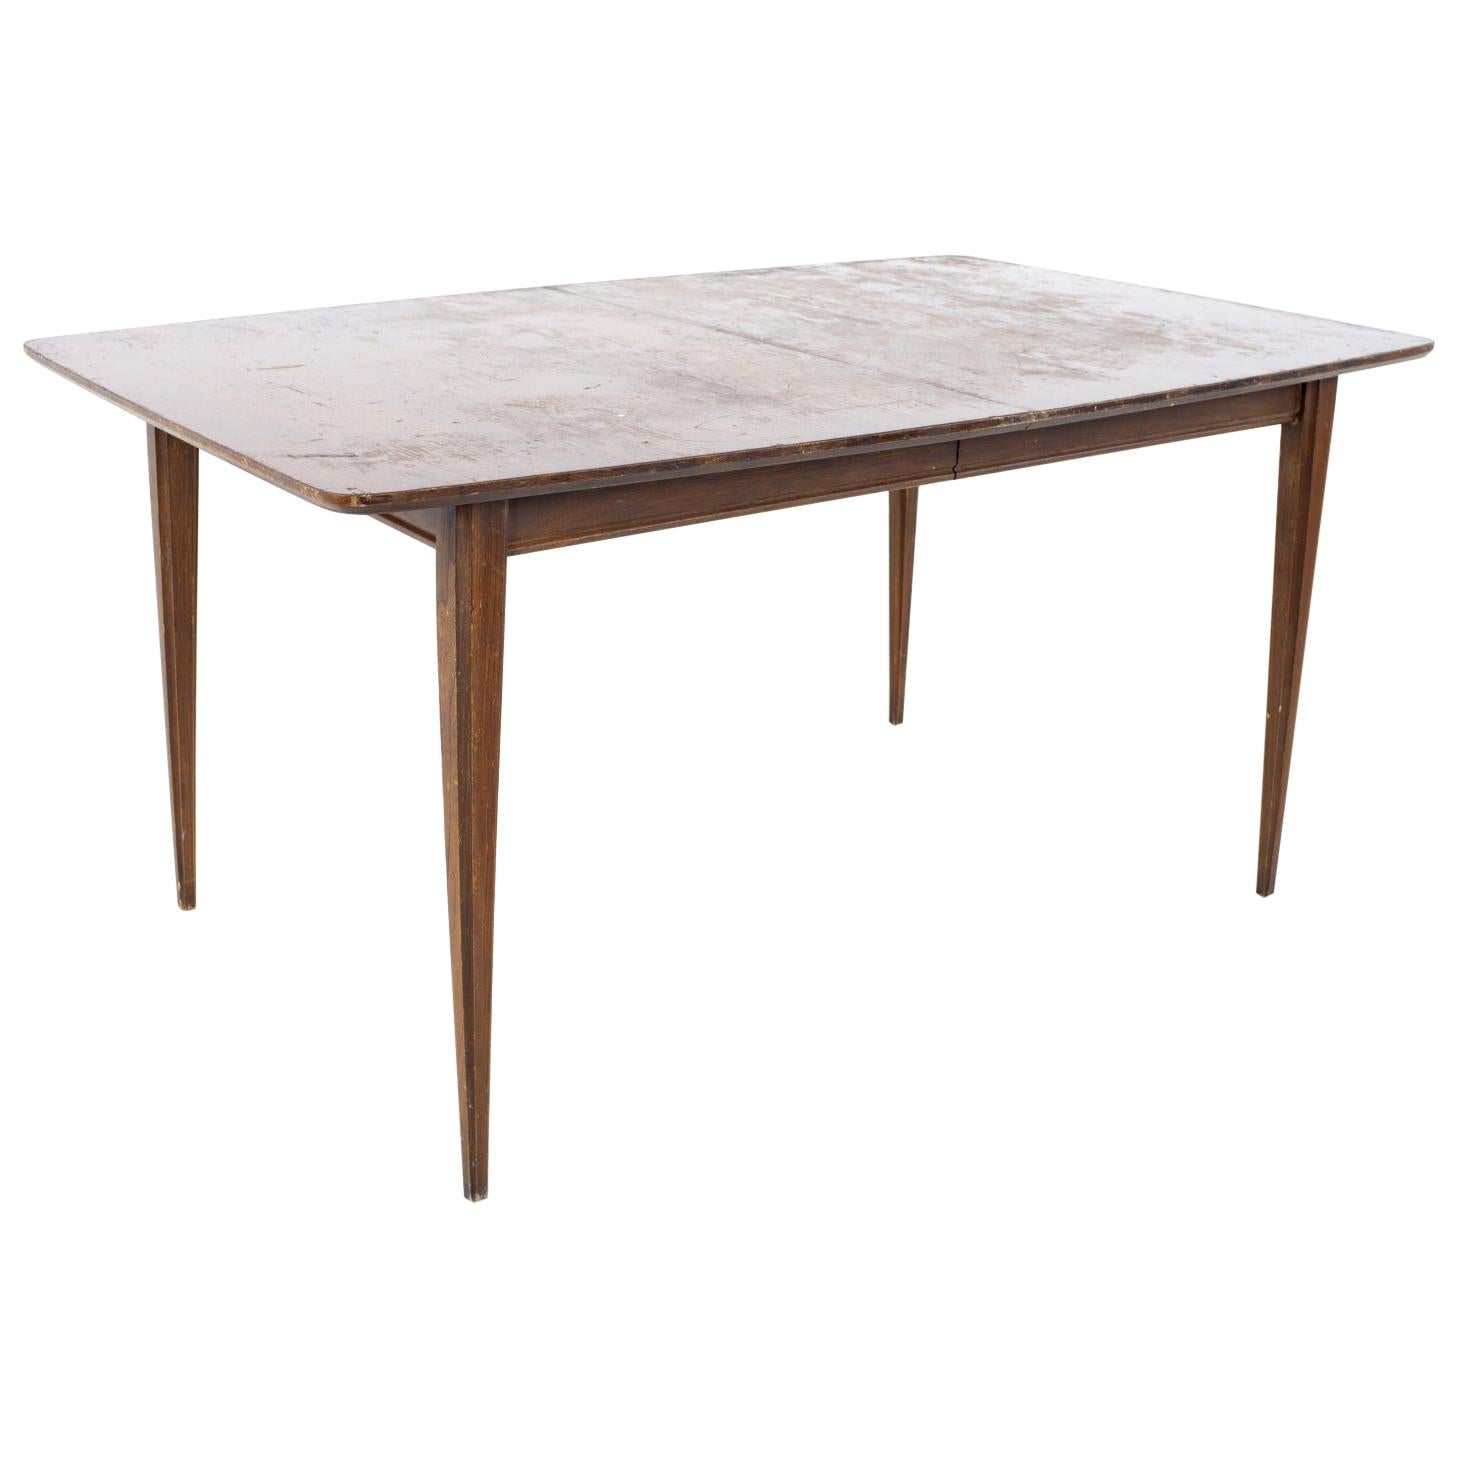 Craddock Furniture Mid Century Walnut Surfboard Dining Table For Sale